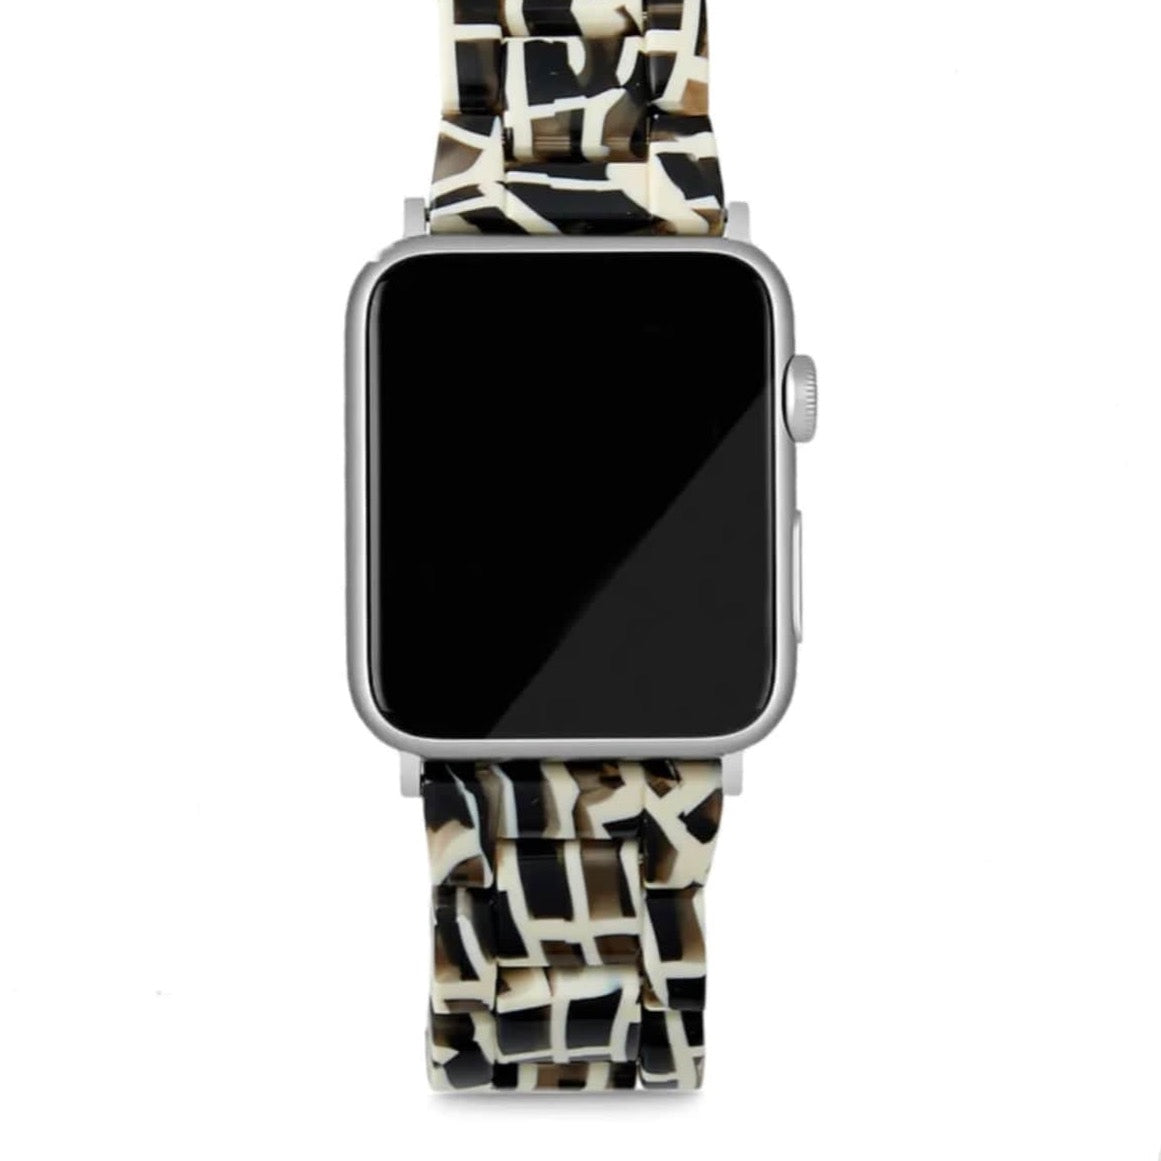 Universal Apple Watch Band/ DELUXE Edition Tokyo Checker with Silver Hardwear by Machete